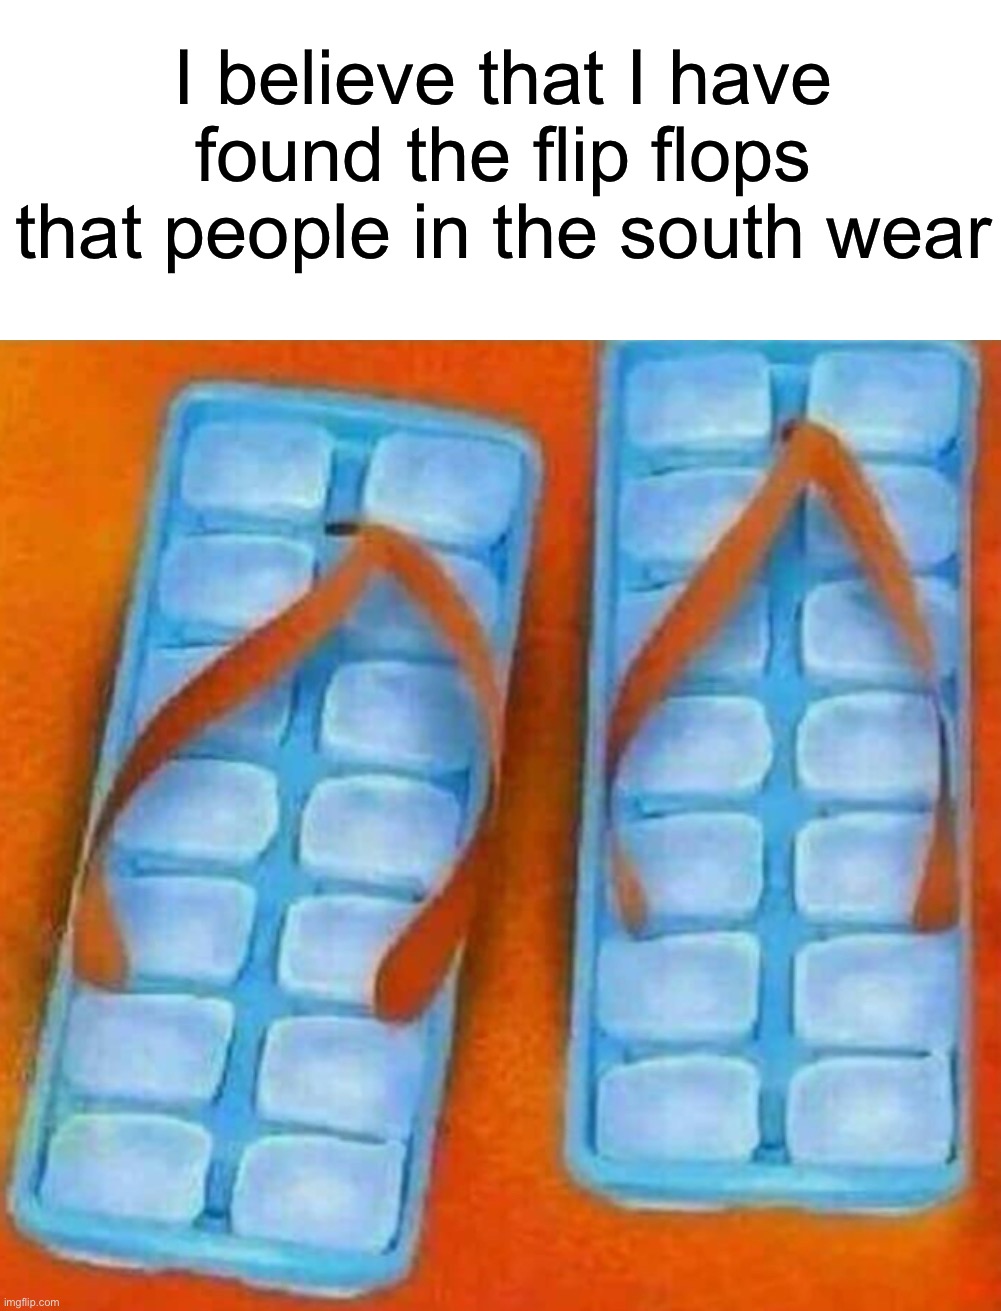 Ice cube flip flops | I believe that I have found the flip flops that people in the south wear | image tagged in memes,funny,funny memes,summer,hot,ice | made w/ Imgflip meme maker